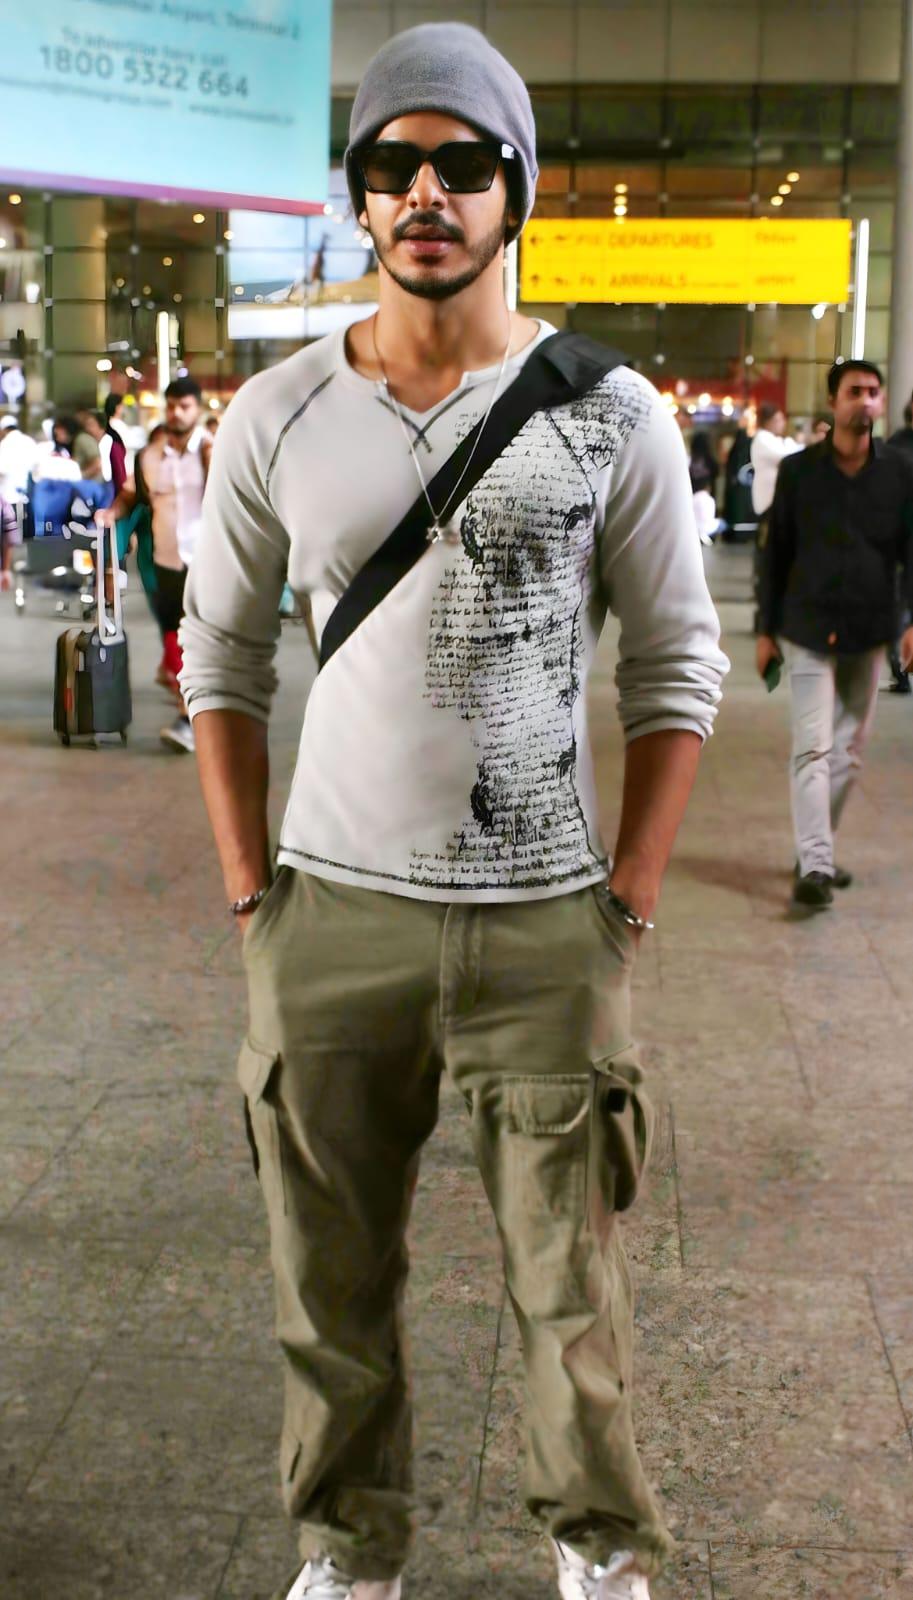 Whether it's a casual look or a suave ensemble, Ishaan's airport sightings are a treat for fans eager to catch a glimpse of their favorite actor on the go